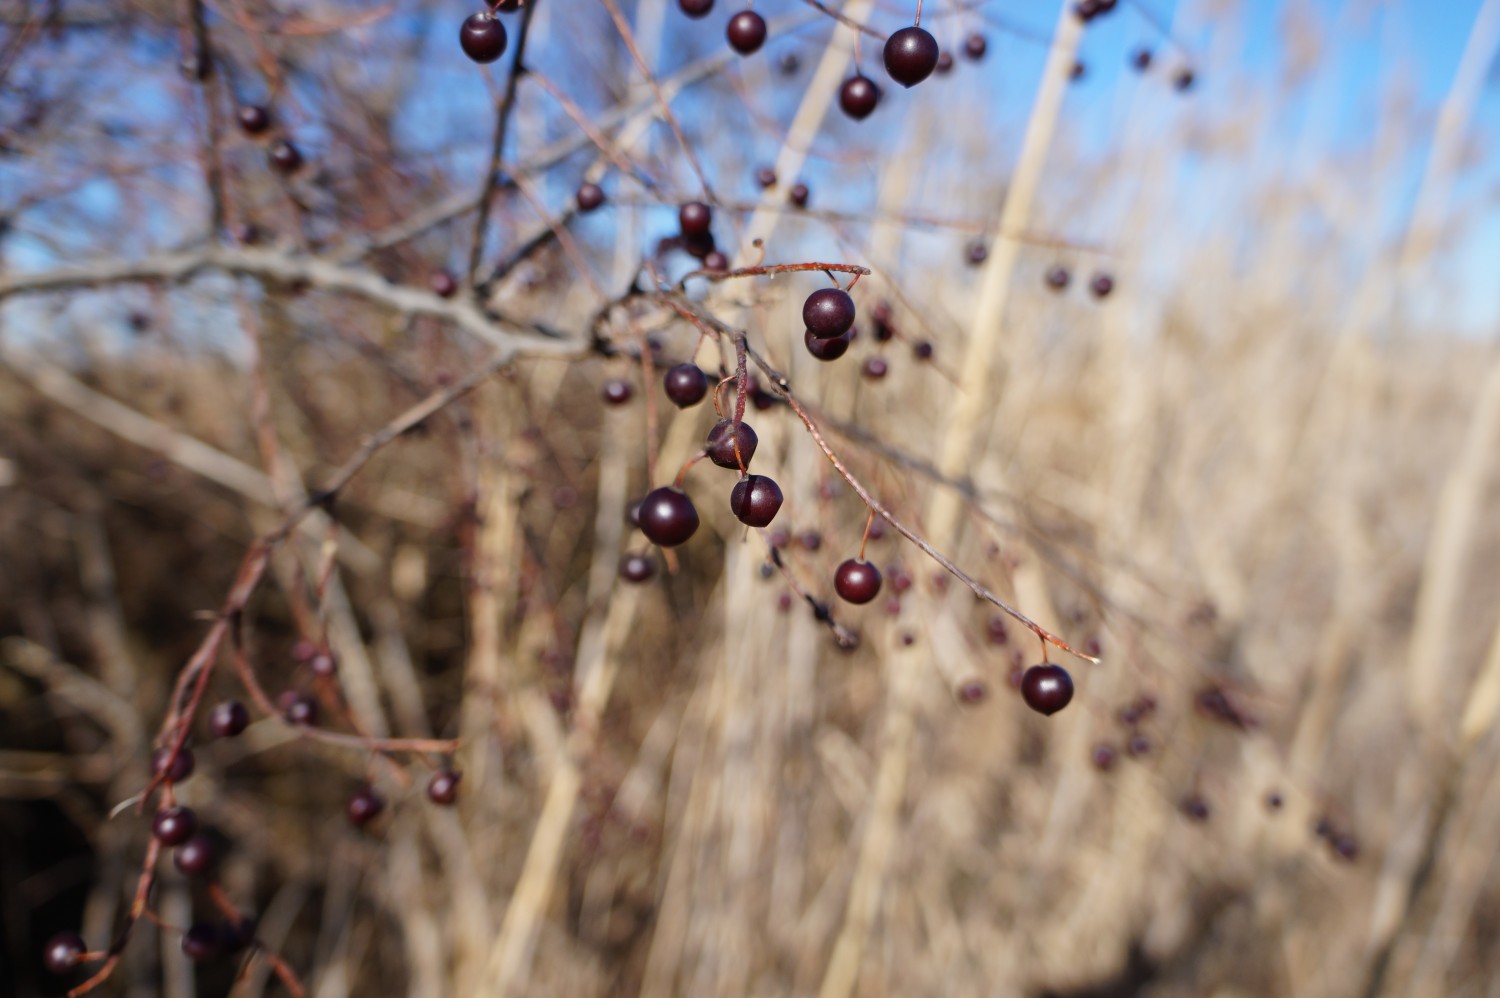 Pea-size purple berries hang individually from leafless twigs. Hackberry fruits.